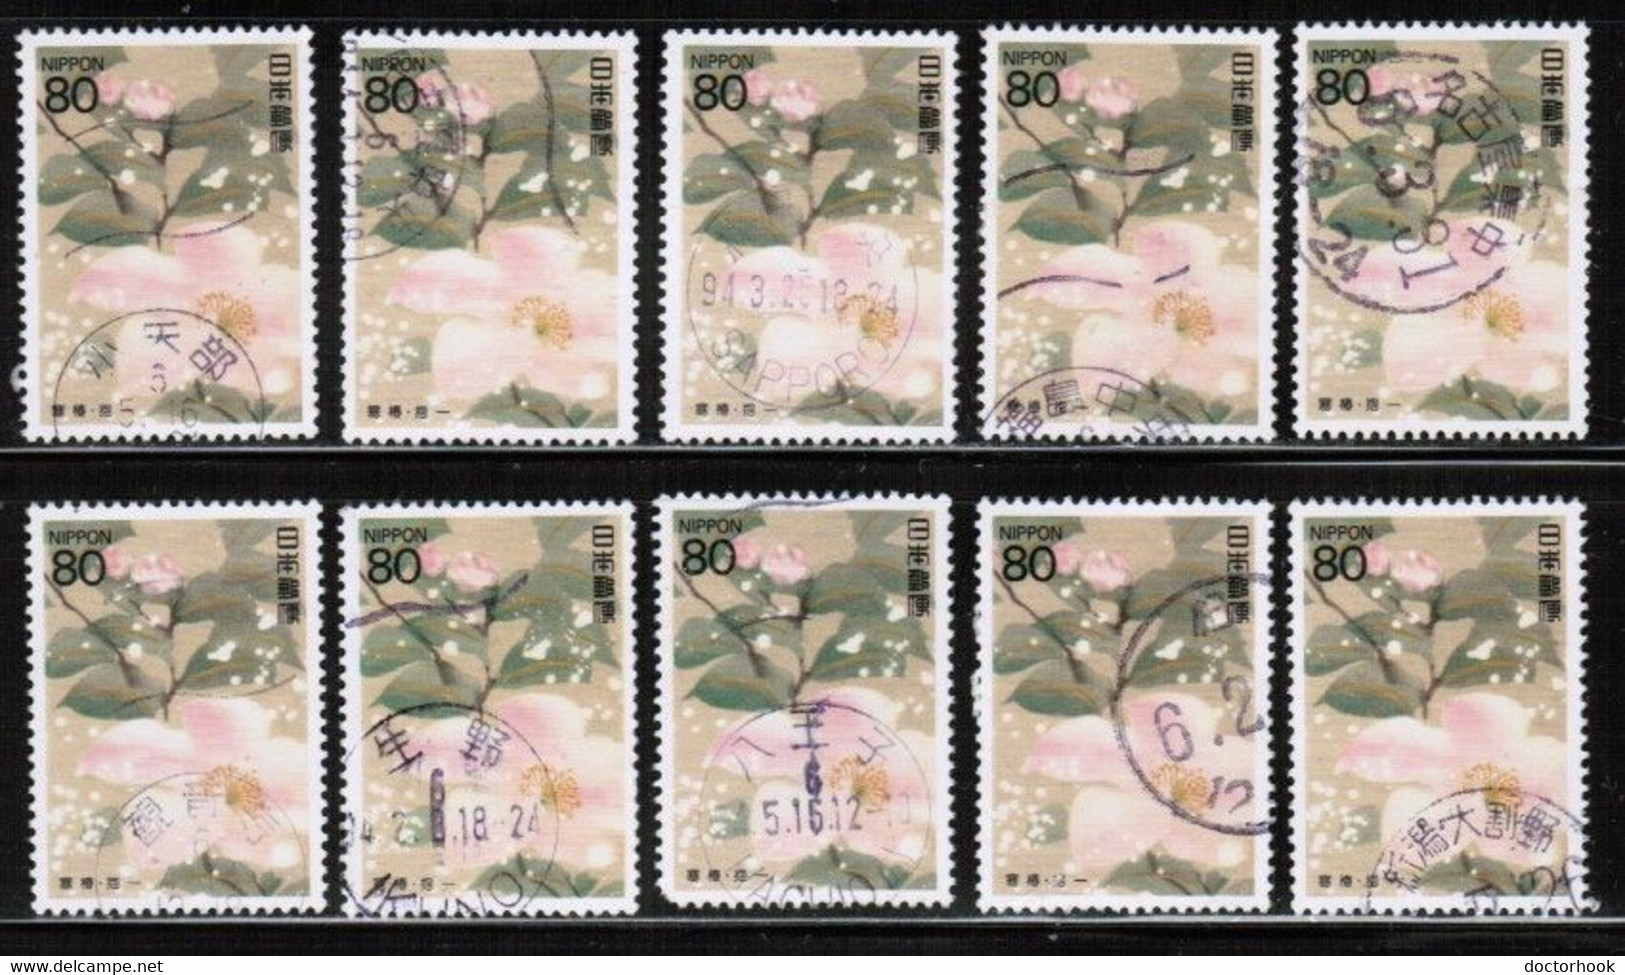 JAPAN   Scott # 2183 USED WHOLESALE LOT OF 10 (CONDITION AS PER SCAN) (WH-604) - Colecciones & Series